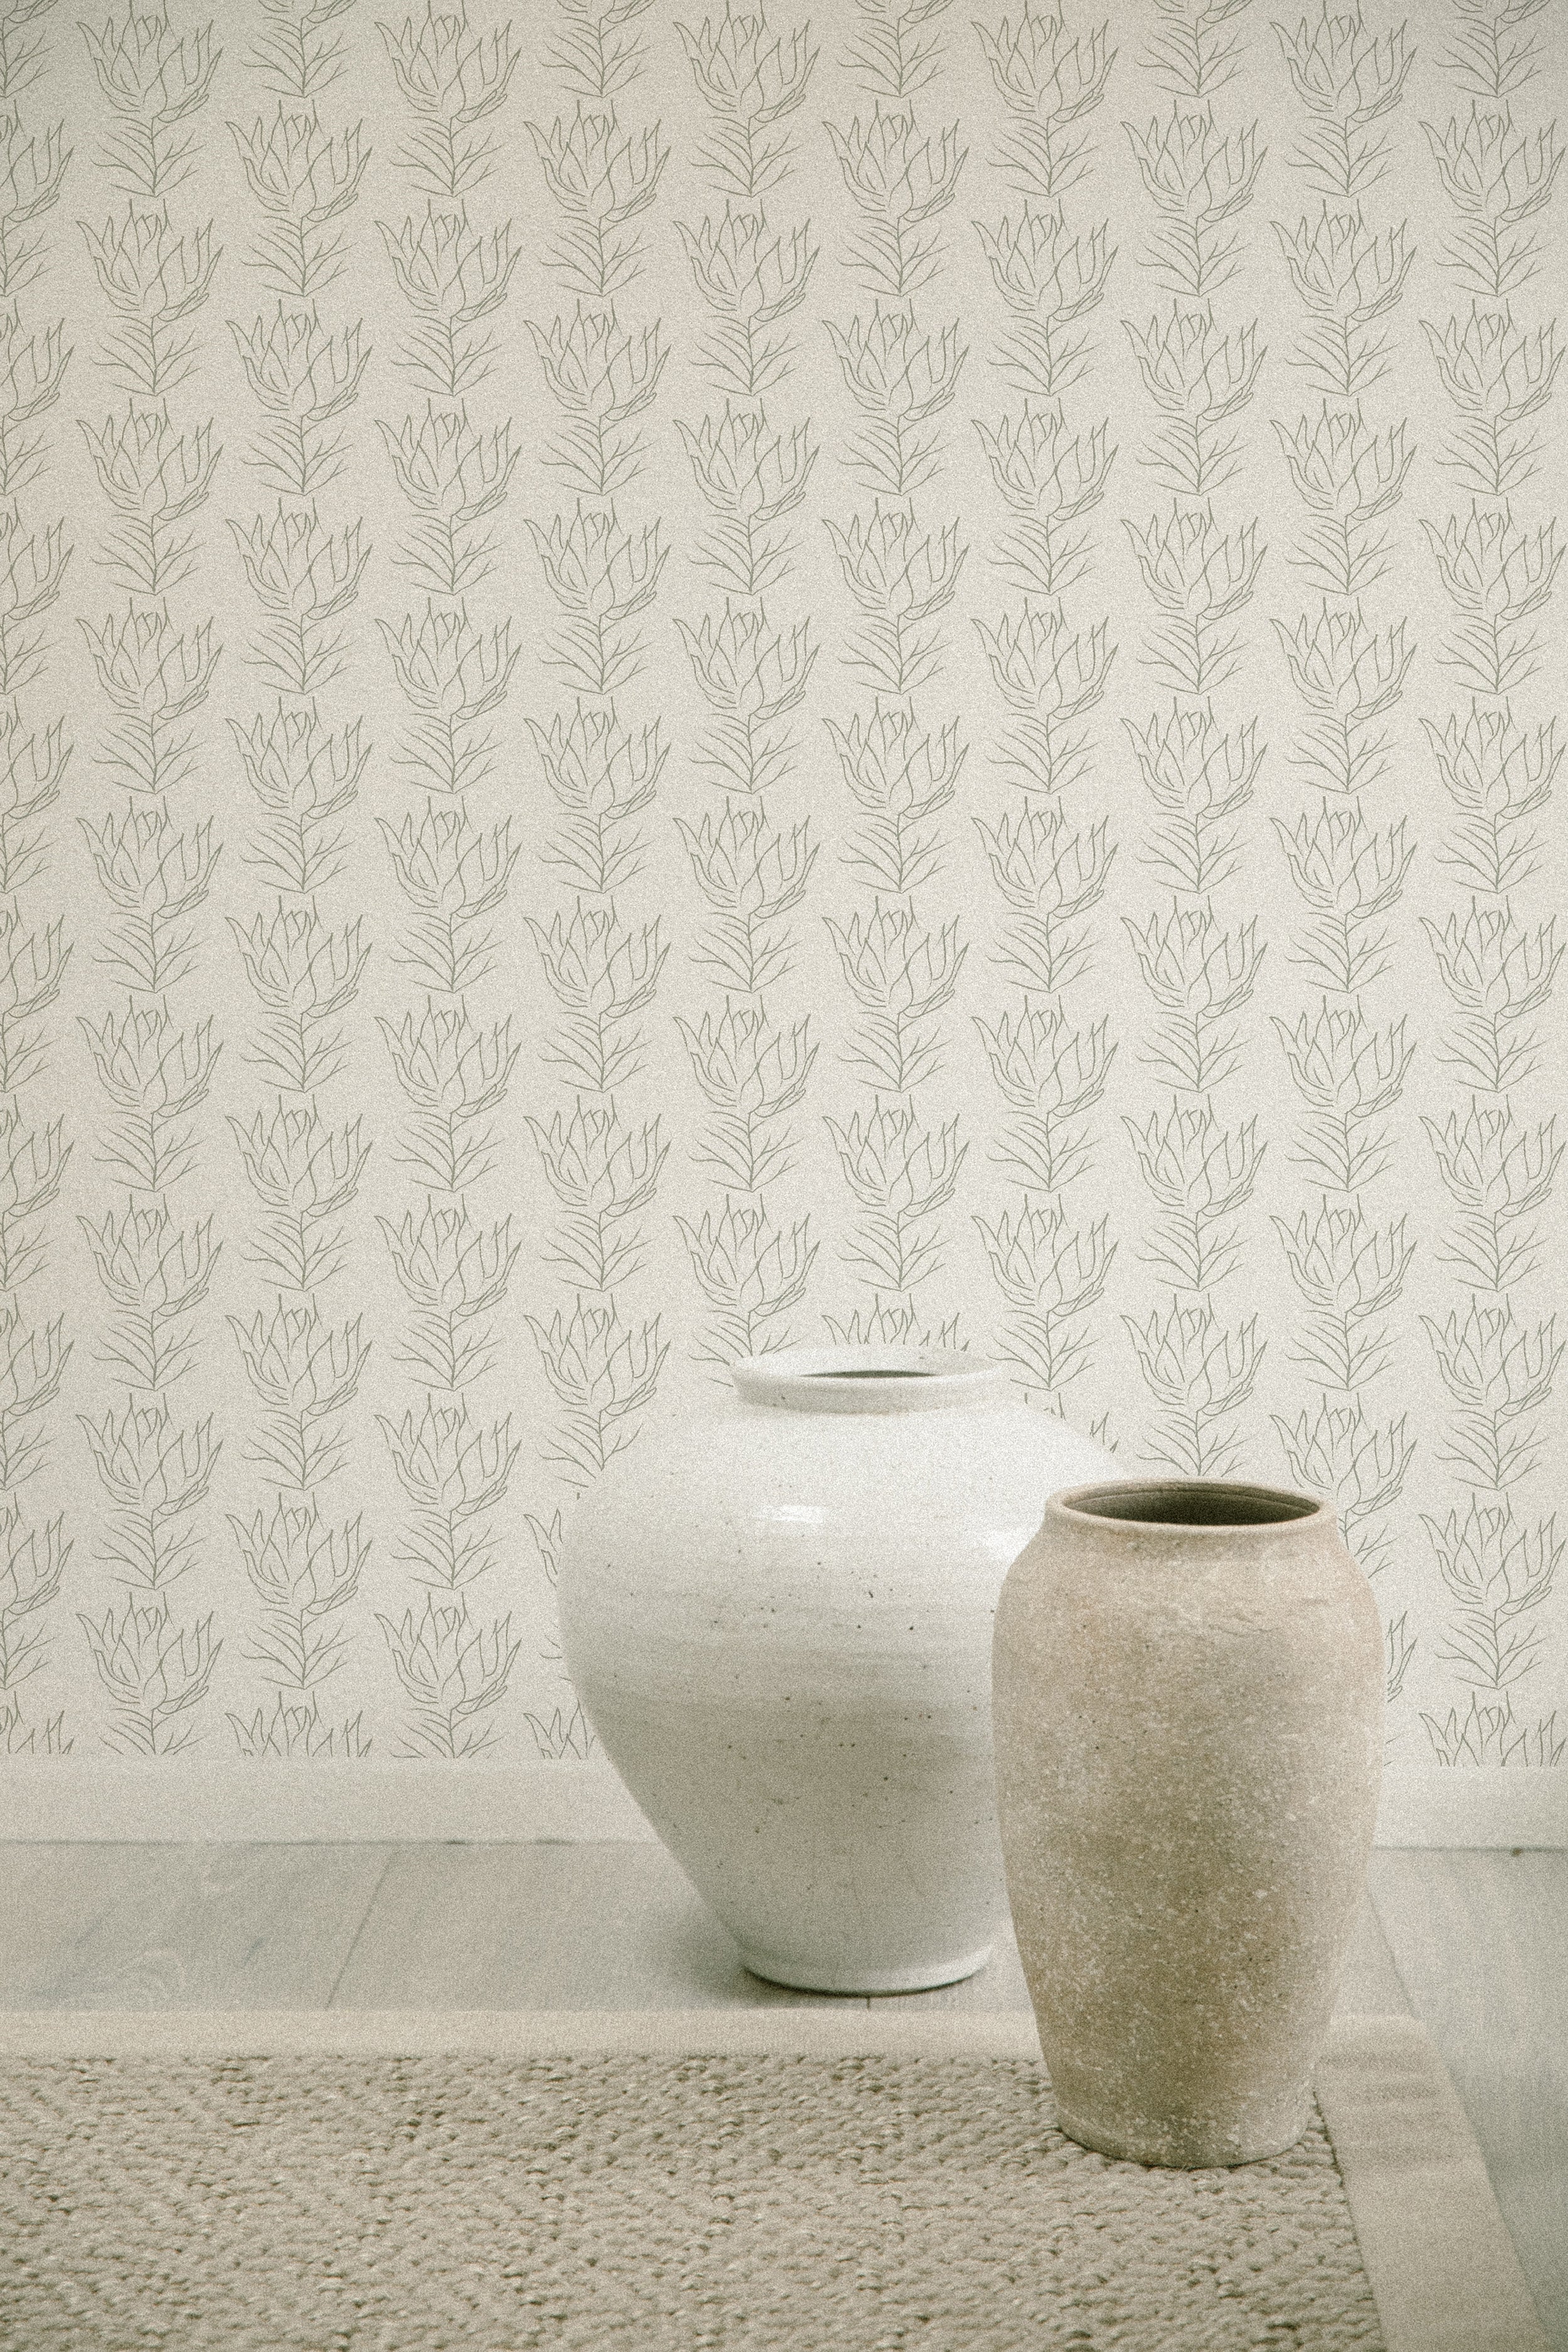 A neutral-toned interior featuring the Line Art Bouquet Wallpaper, with a delicate pattern of sketched floral bouquets in a repetitive arrangement, accompanied by two earthenware vases on a woven mat, invoking a sense of artisanal elegance.